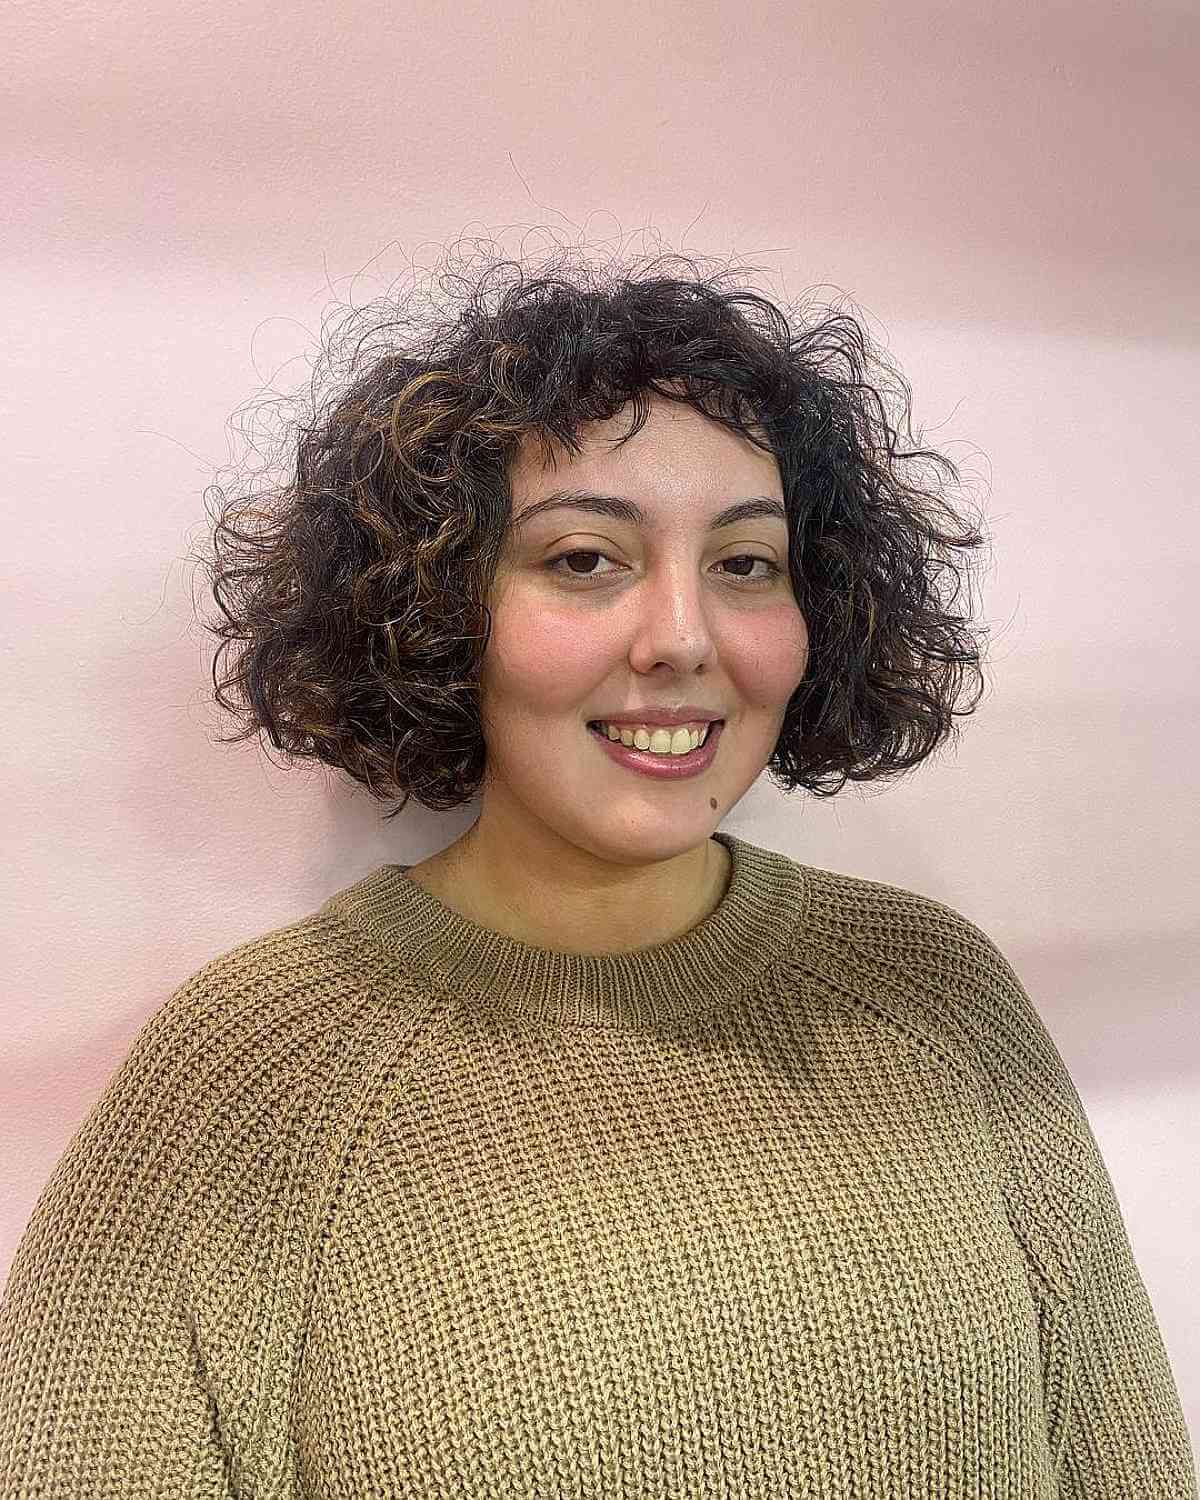 Short chin length choppy hair with frizzy curls and micro bangs